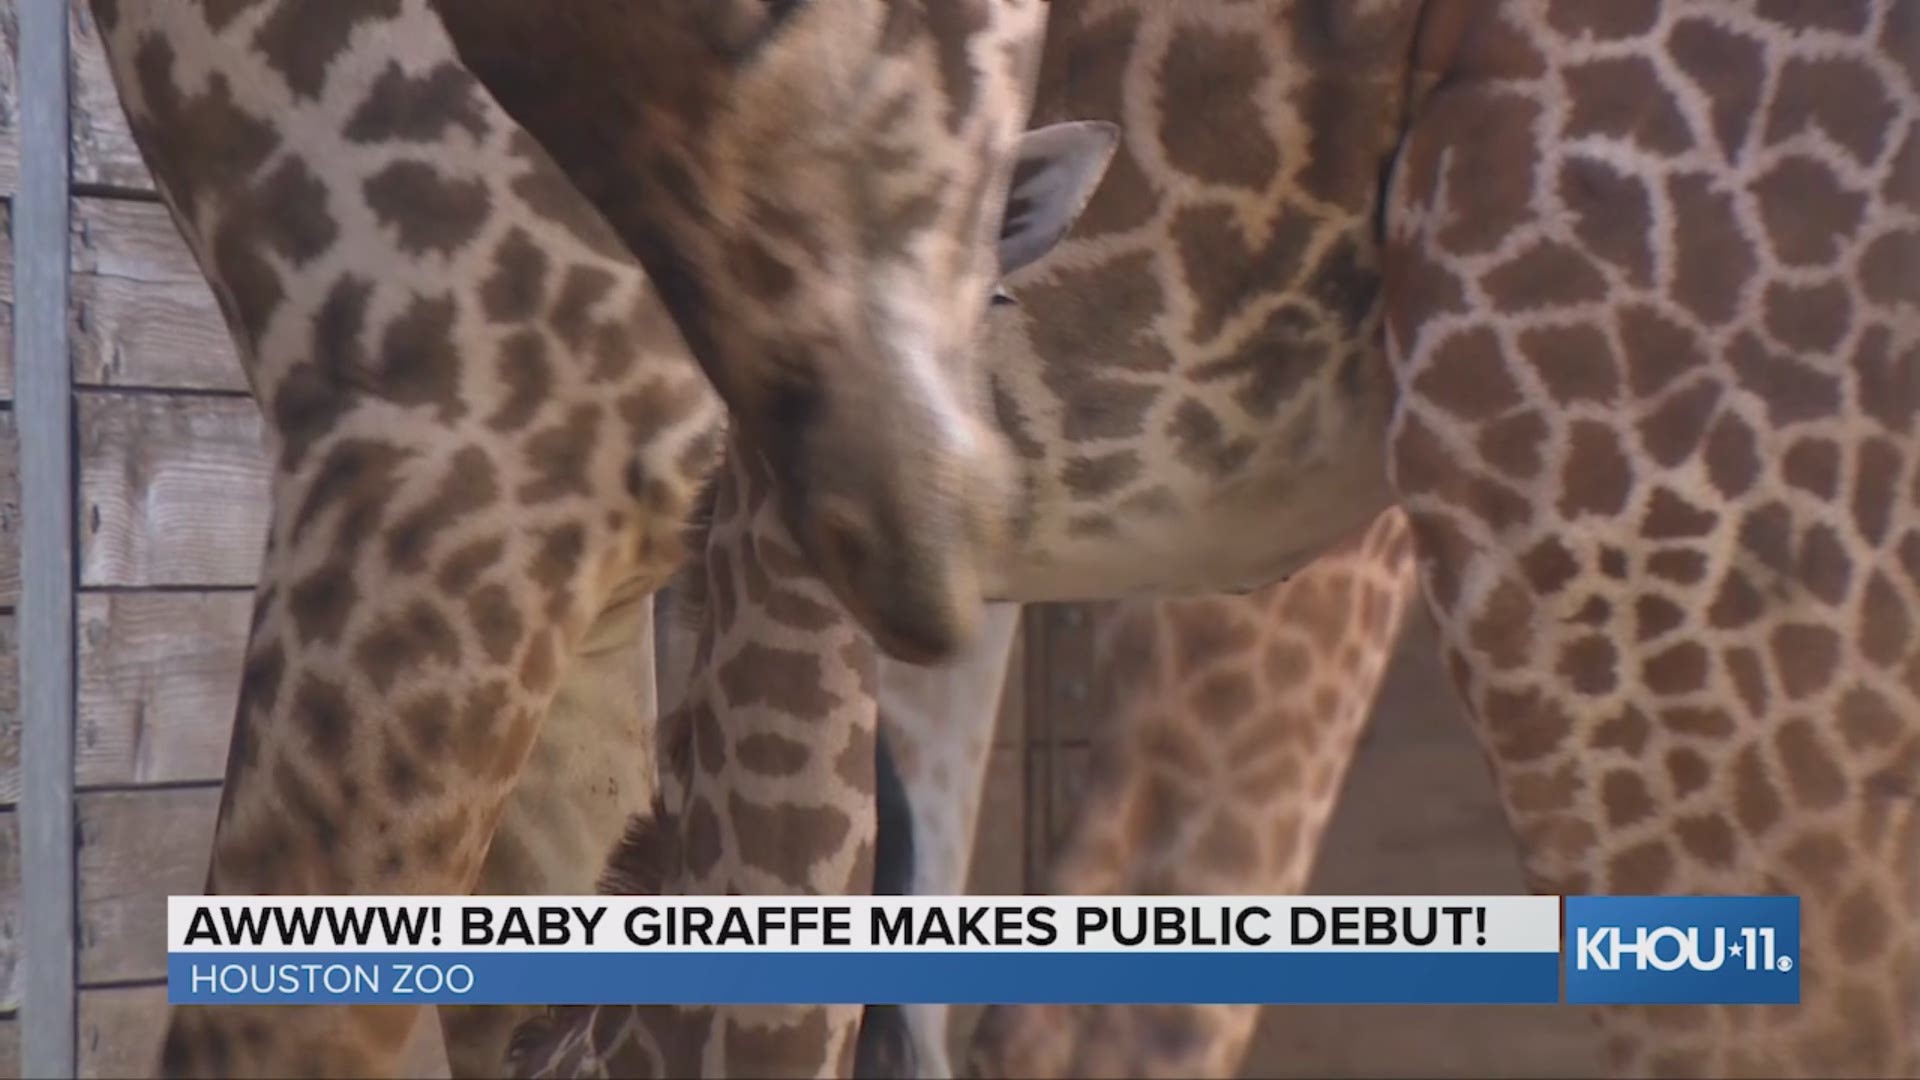 The Houston Zoo’s 1-week-old Masai giraffe joined the herd and made his public debut Tuesday morning. The zoo also announced his name – Bobbie.